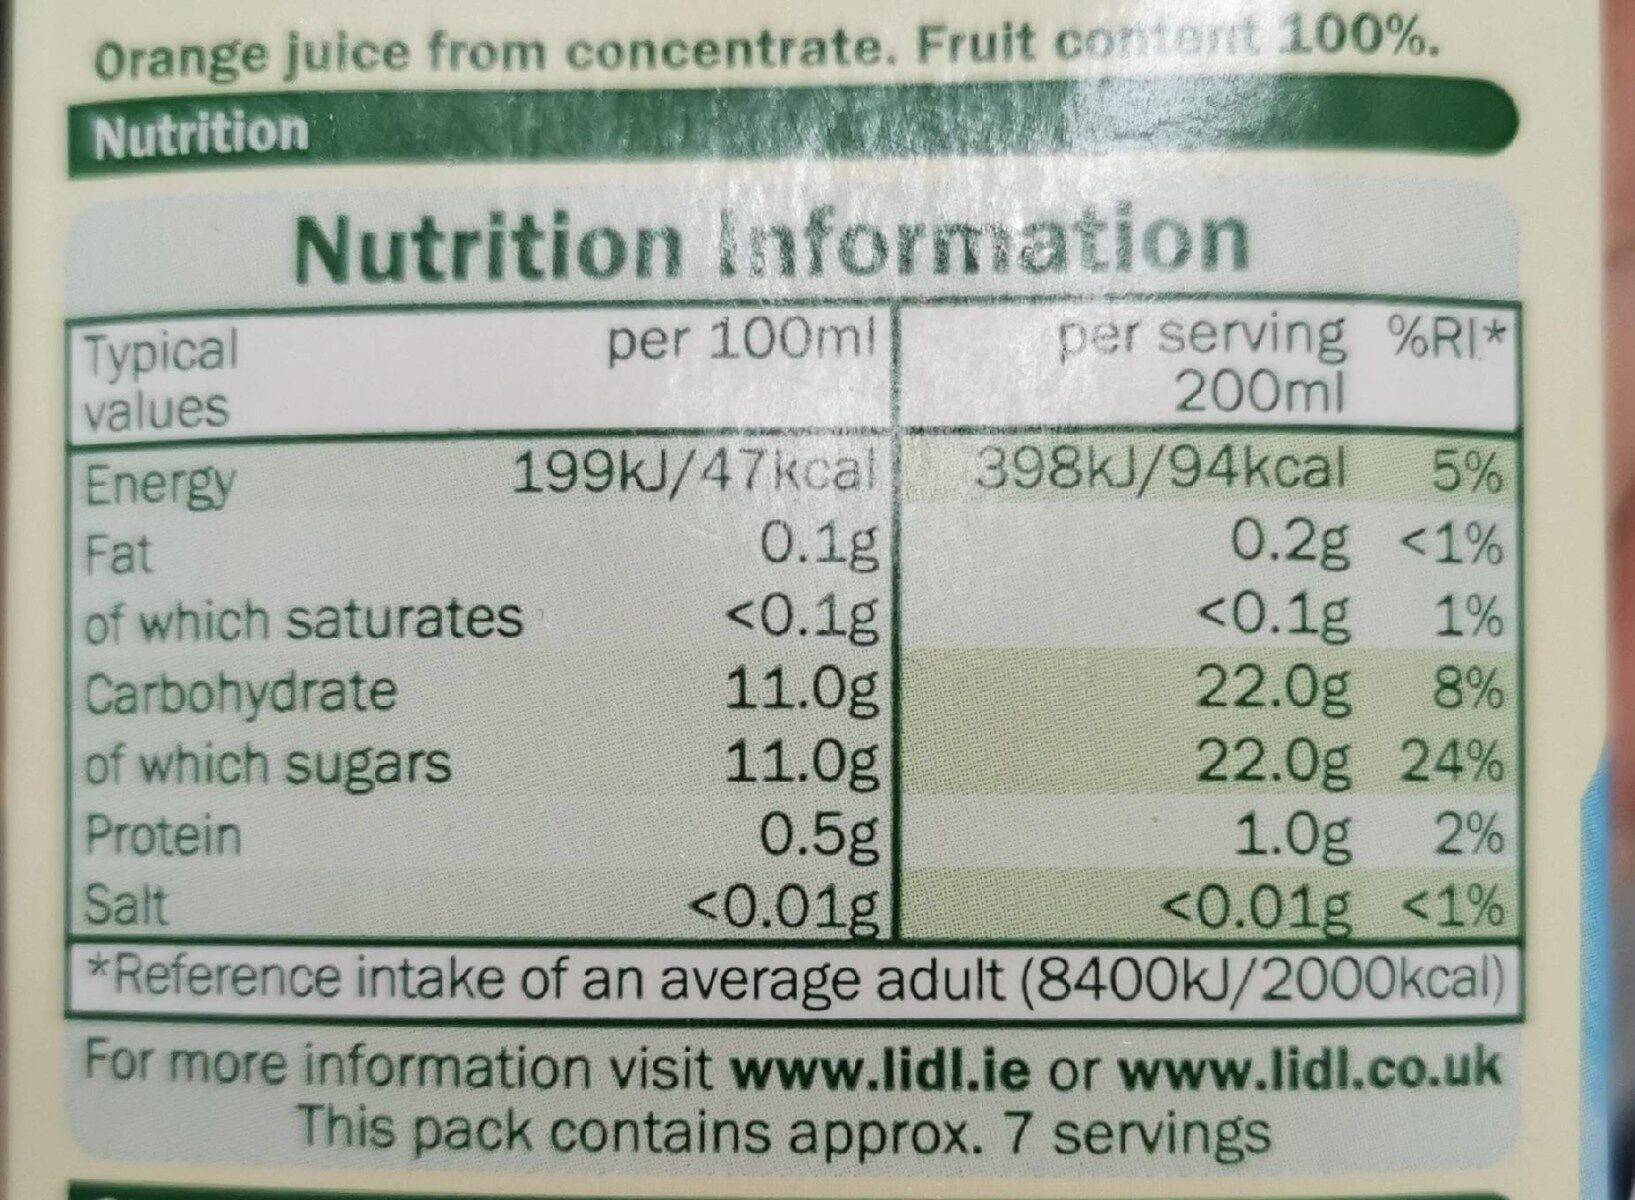 100% Orange juice from concentrate - Nutrition facts